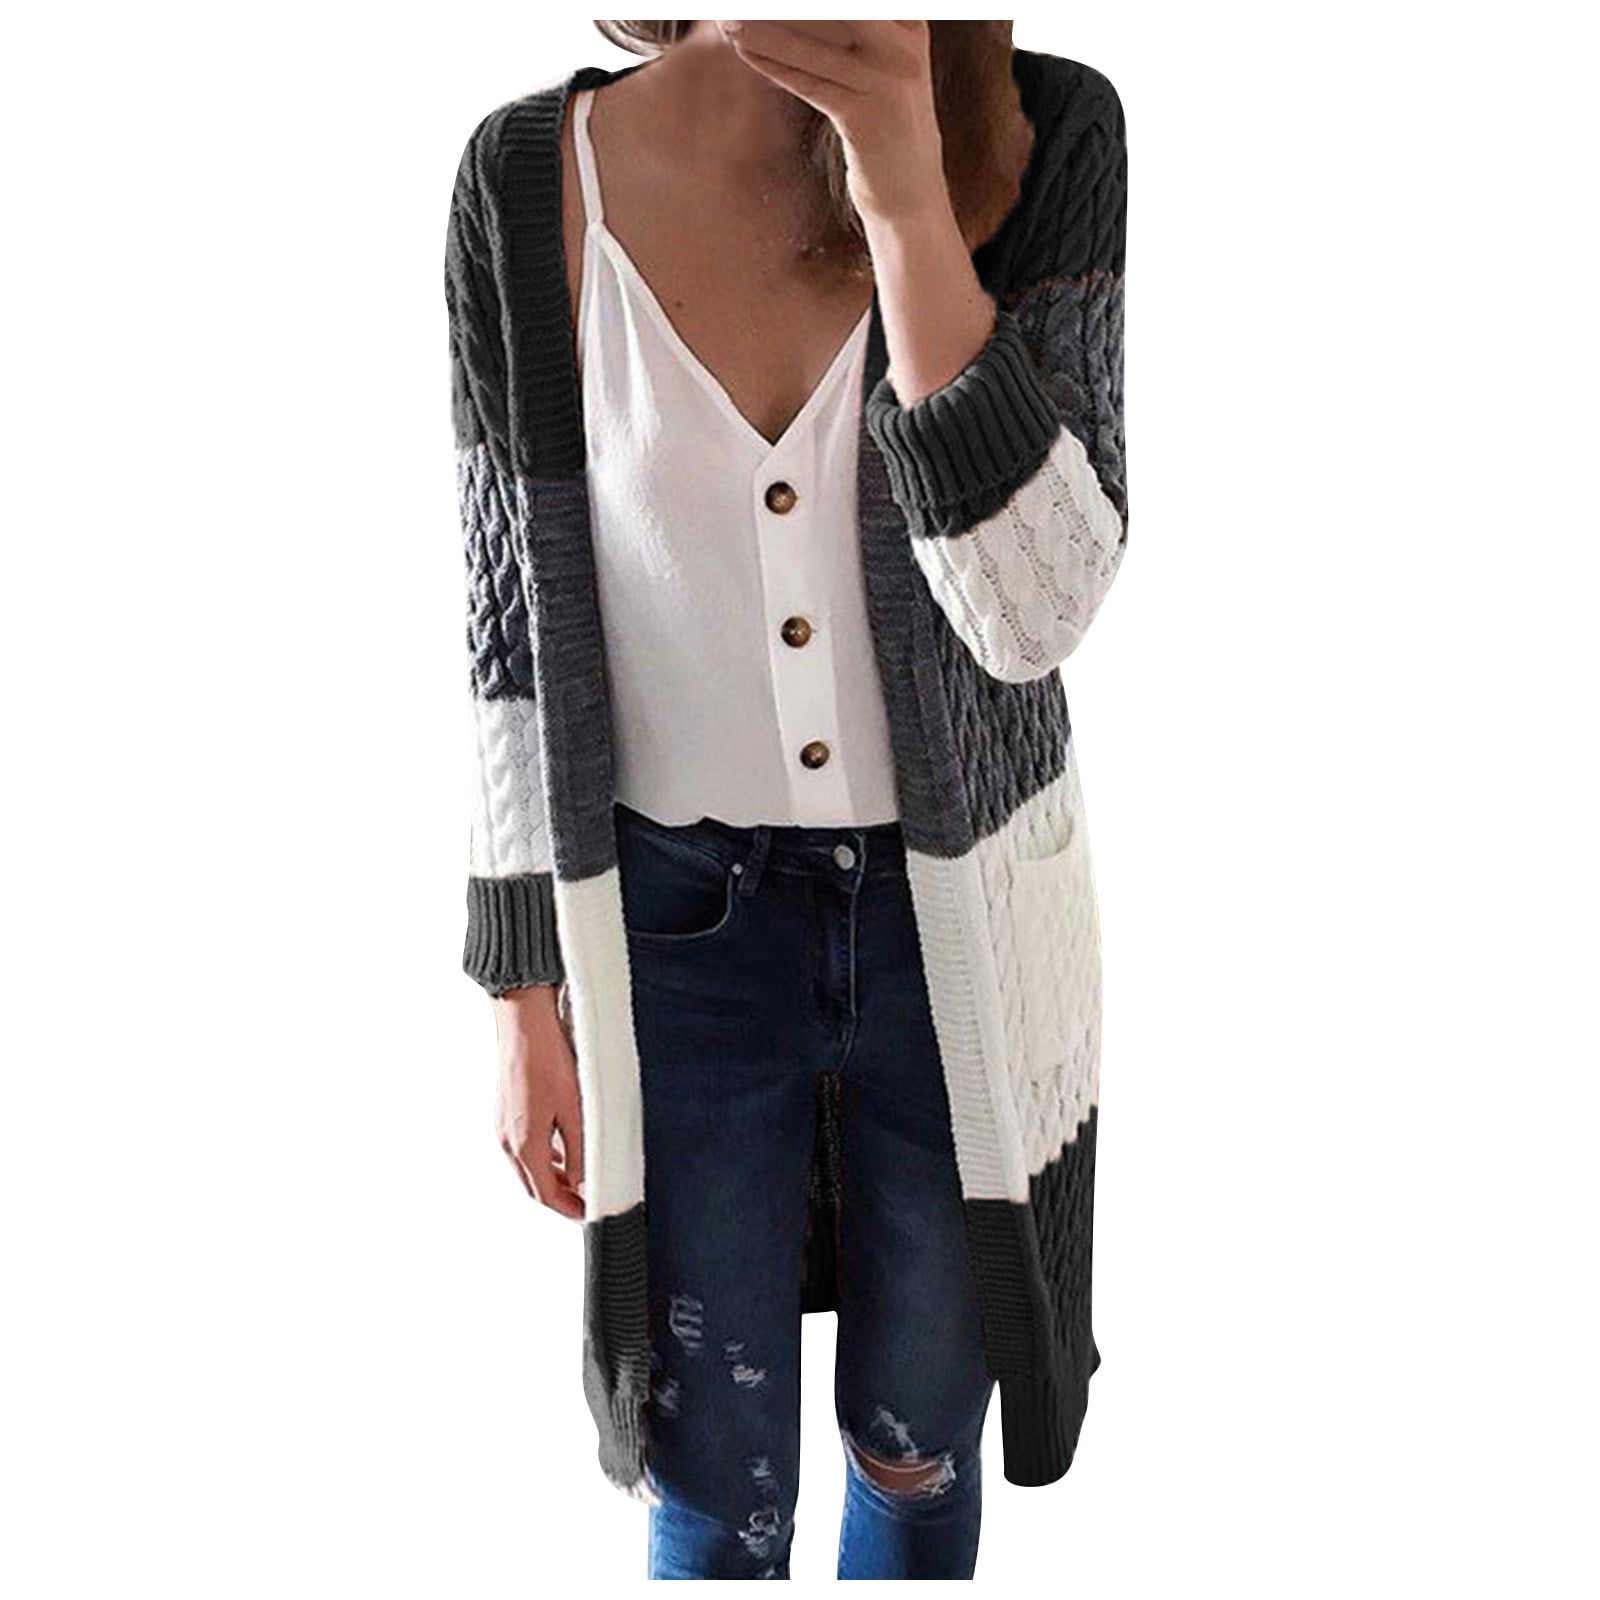 LADIES PONCHO STYLE WATERFALL FRONT CARDIGAN STRIPED STRIPE BLUE RED 8 10 12 14 